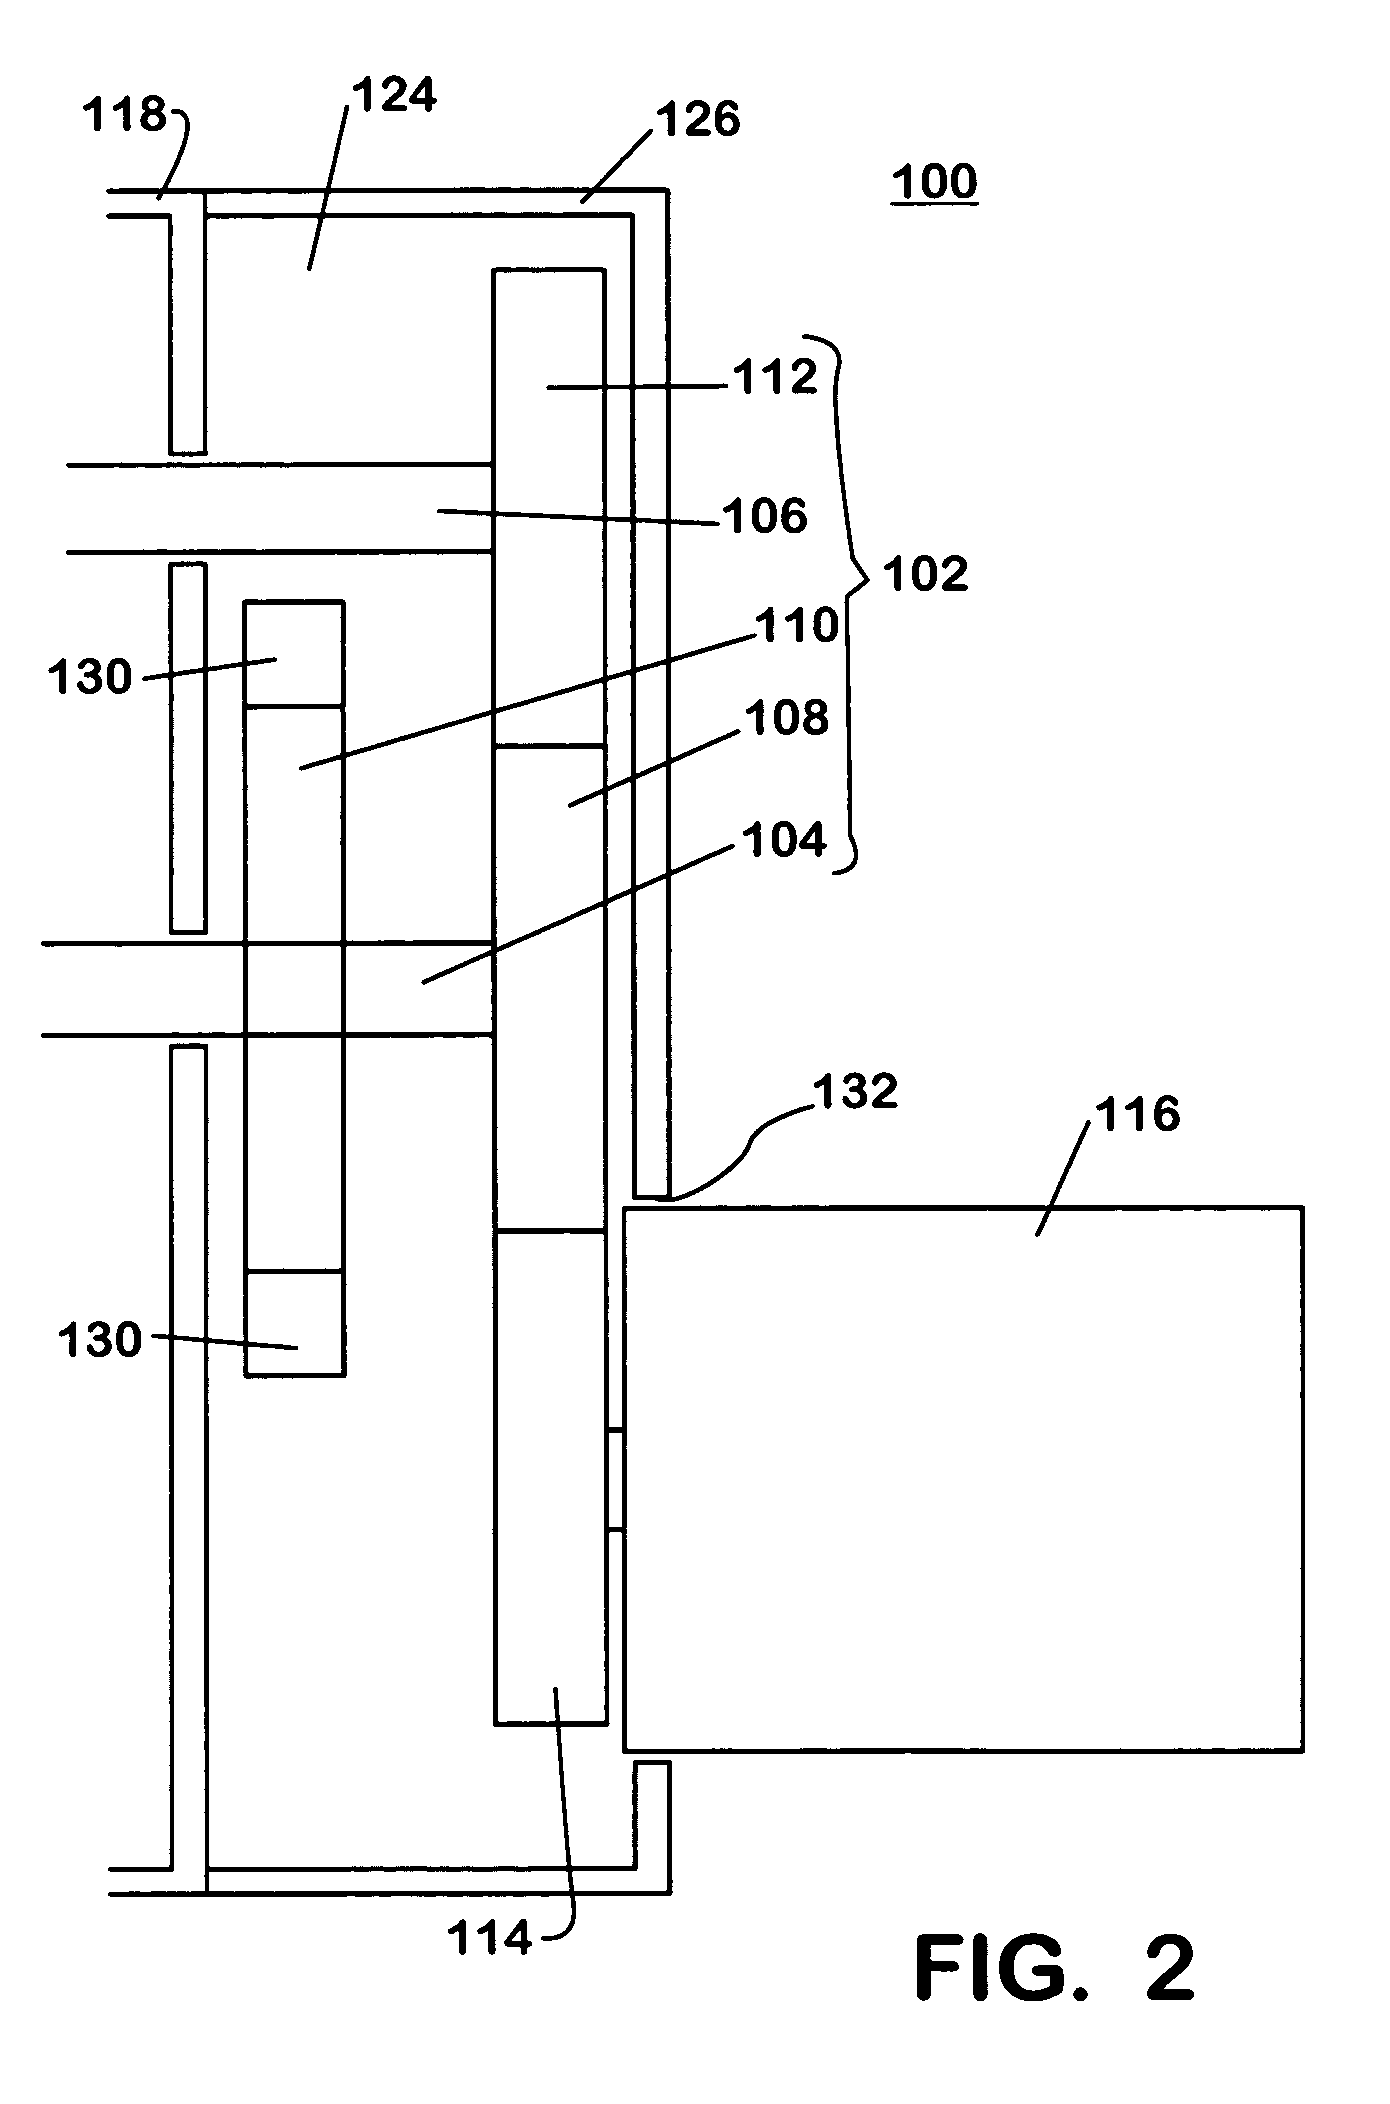 Fuel pump drive system in an internal combustion engine